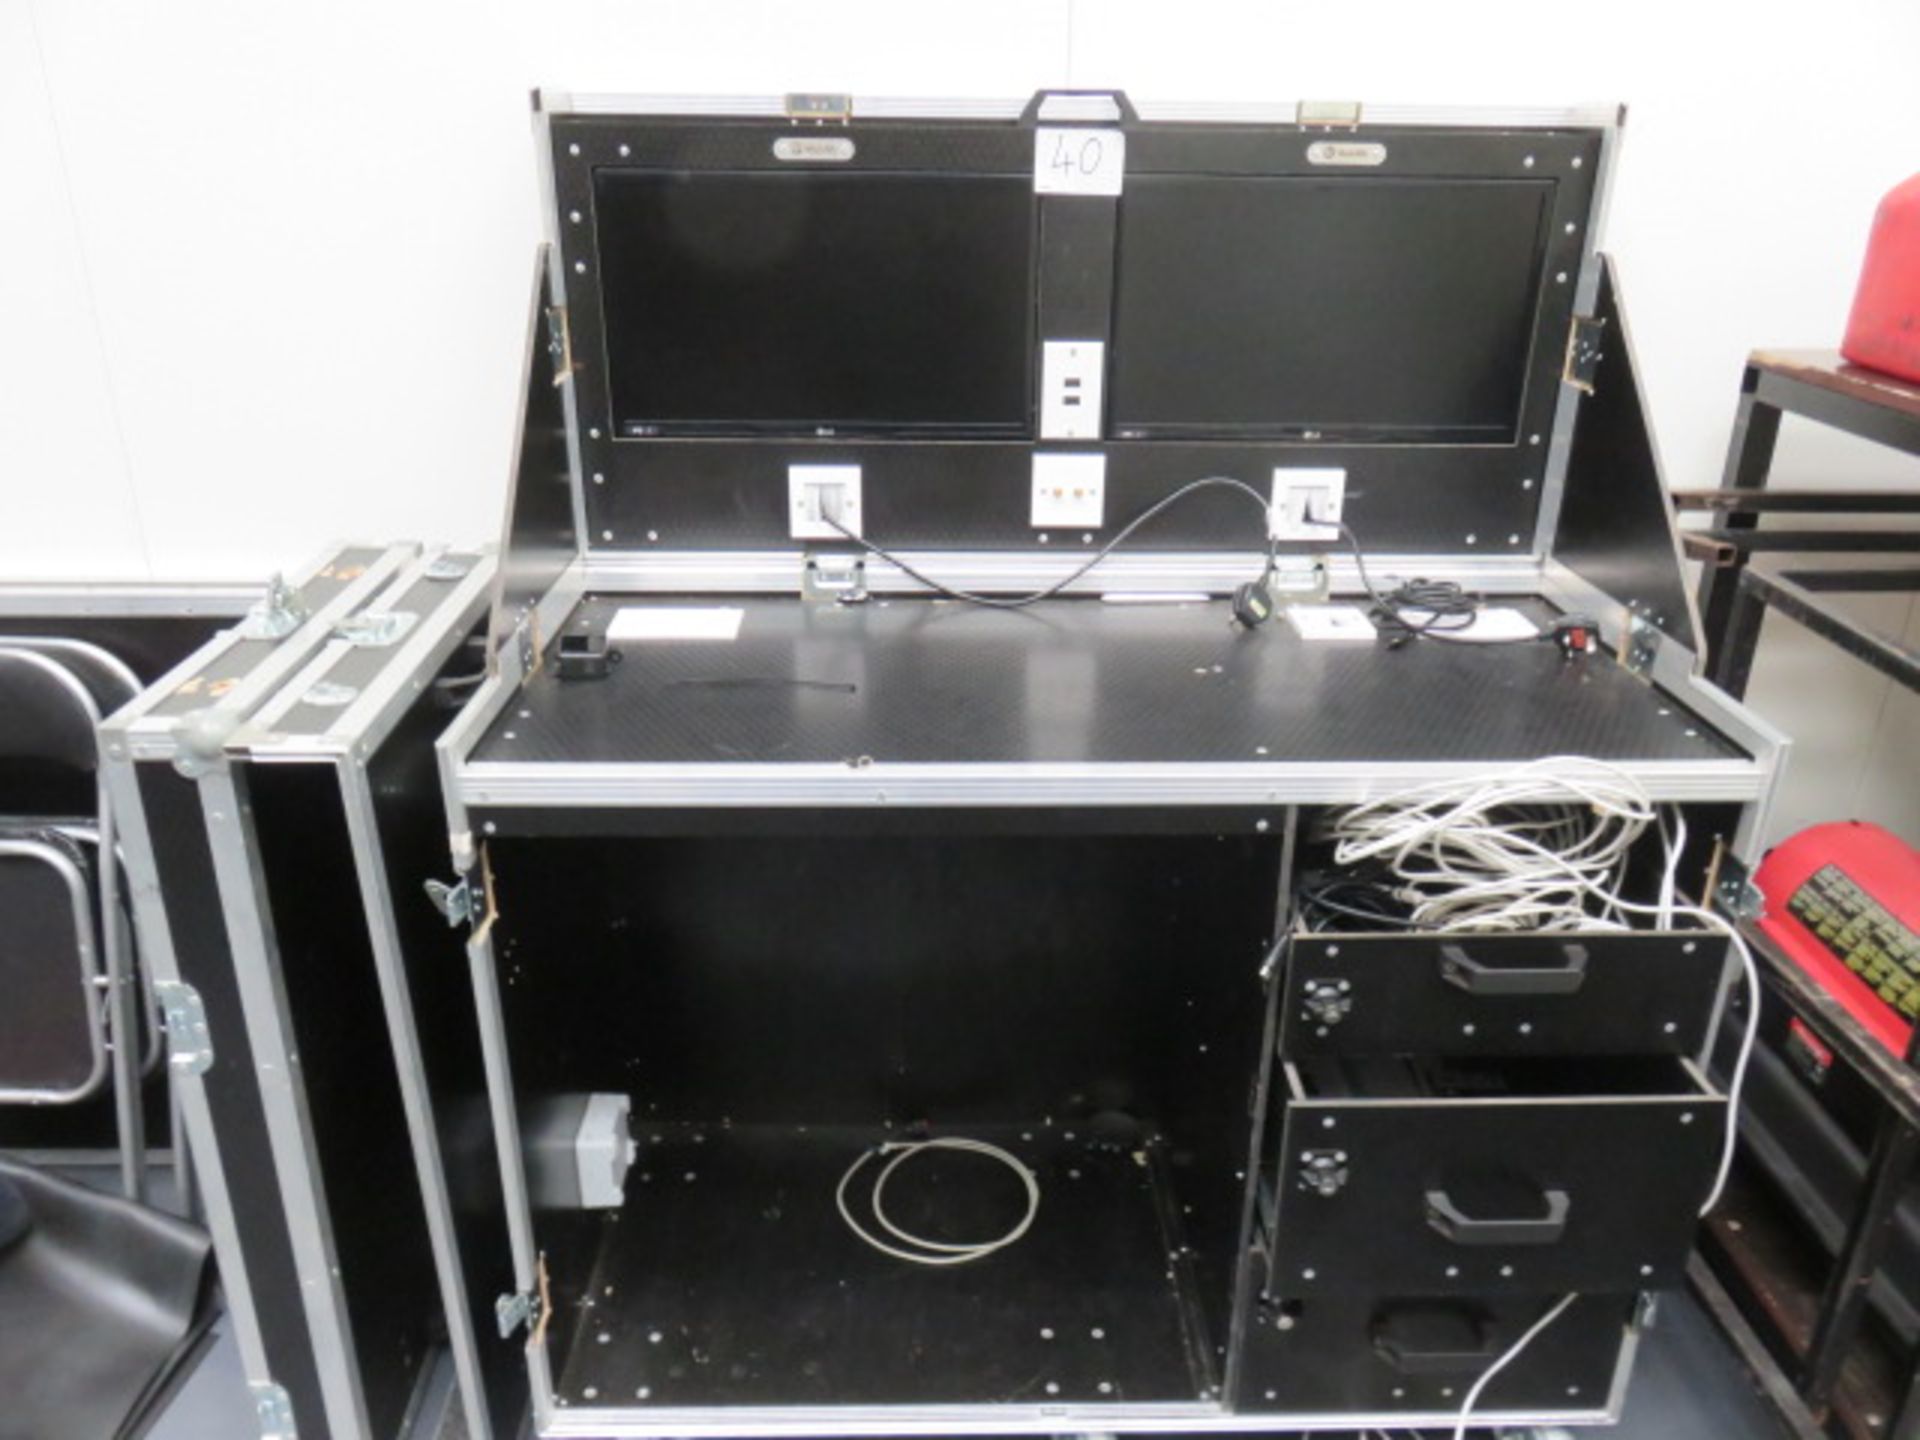 Unbranded Data Station with (2) LG IPS LED 27in Screens and (3) Drawers in Heavy Duty Mobile Flight